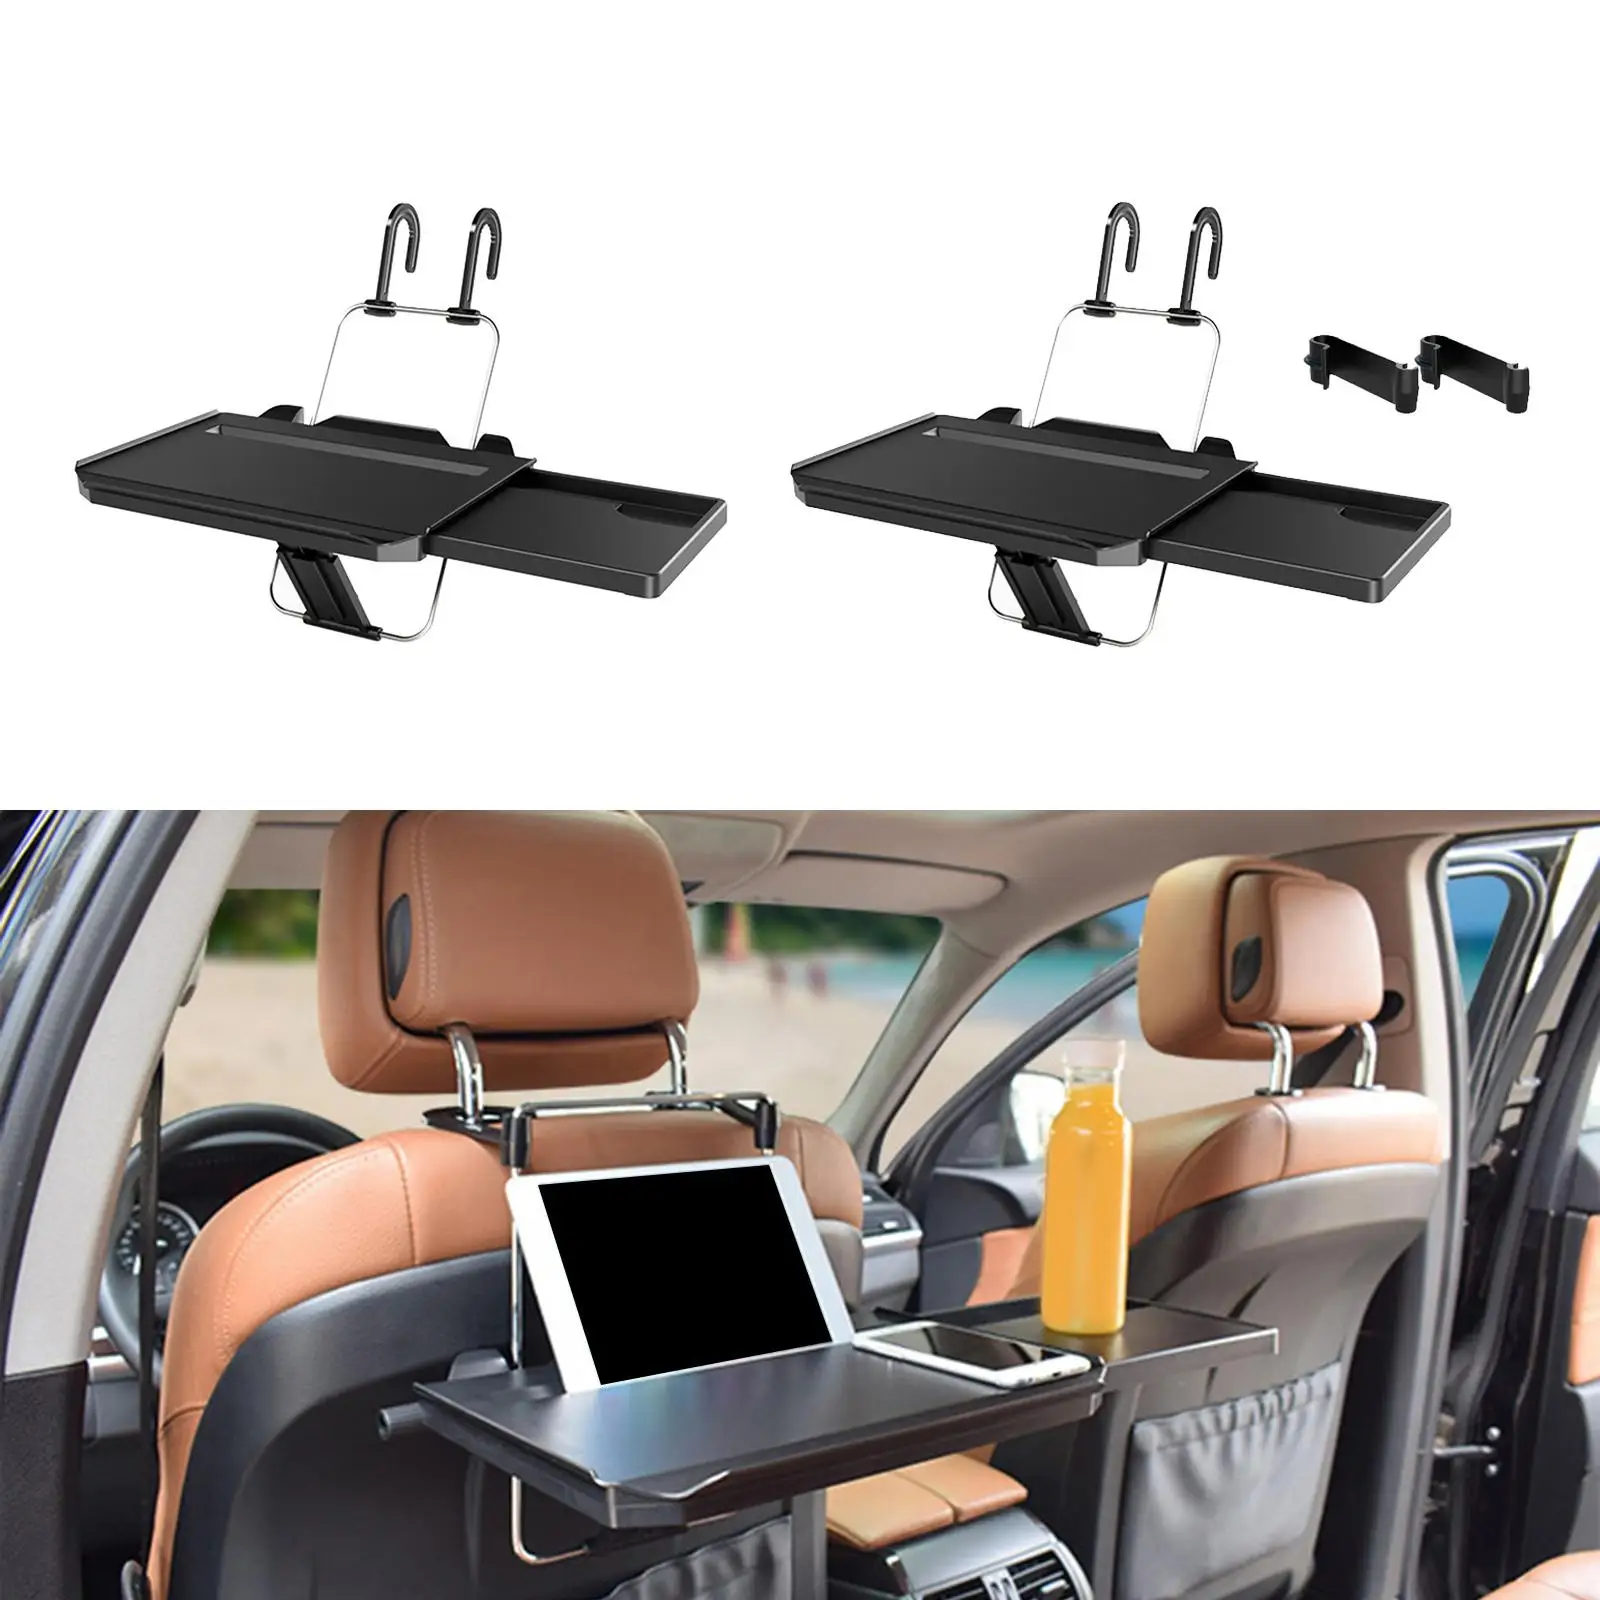 Car Steering Wheel Tray Holder Foldable Car Computer Rack Practical with Drawer Back Seat Headrest Tray for Laptop Work